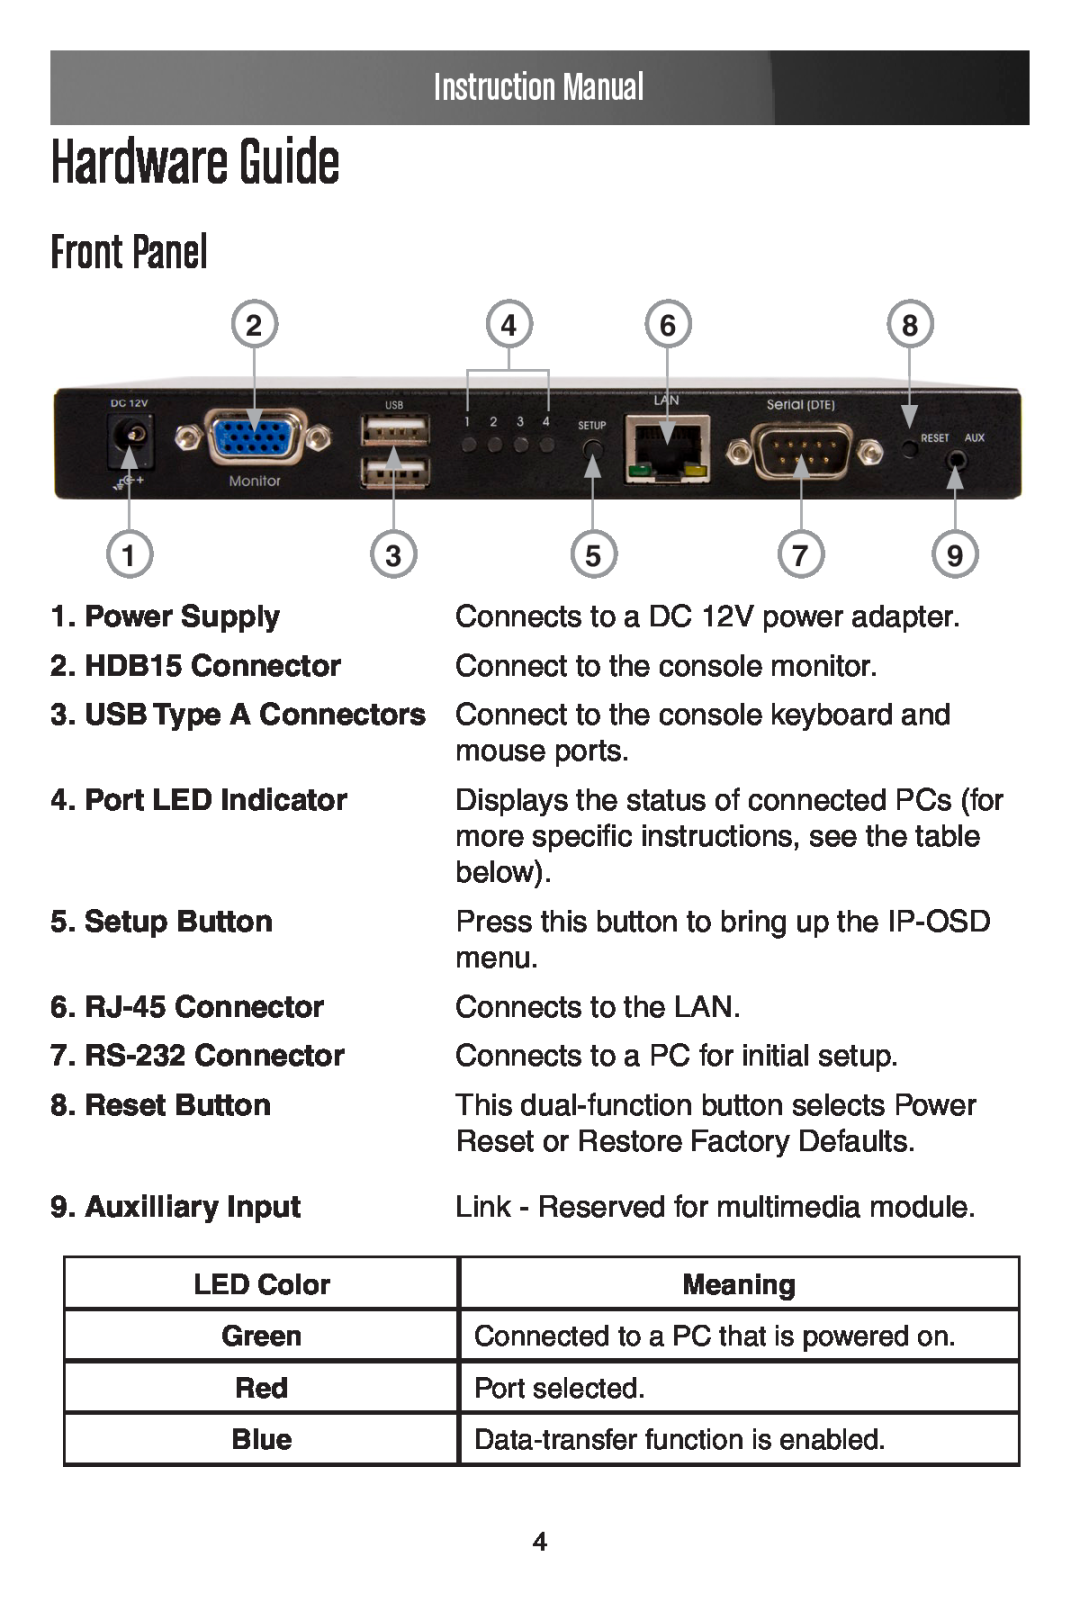 StarTech.com SV441DUSBI Hardware Guide, Front Panel, Power Supply, HDB15 Connector, Connect to the console monitor, menu 